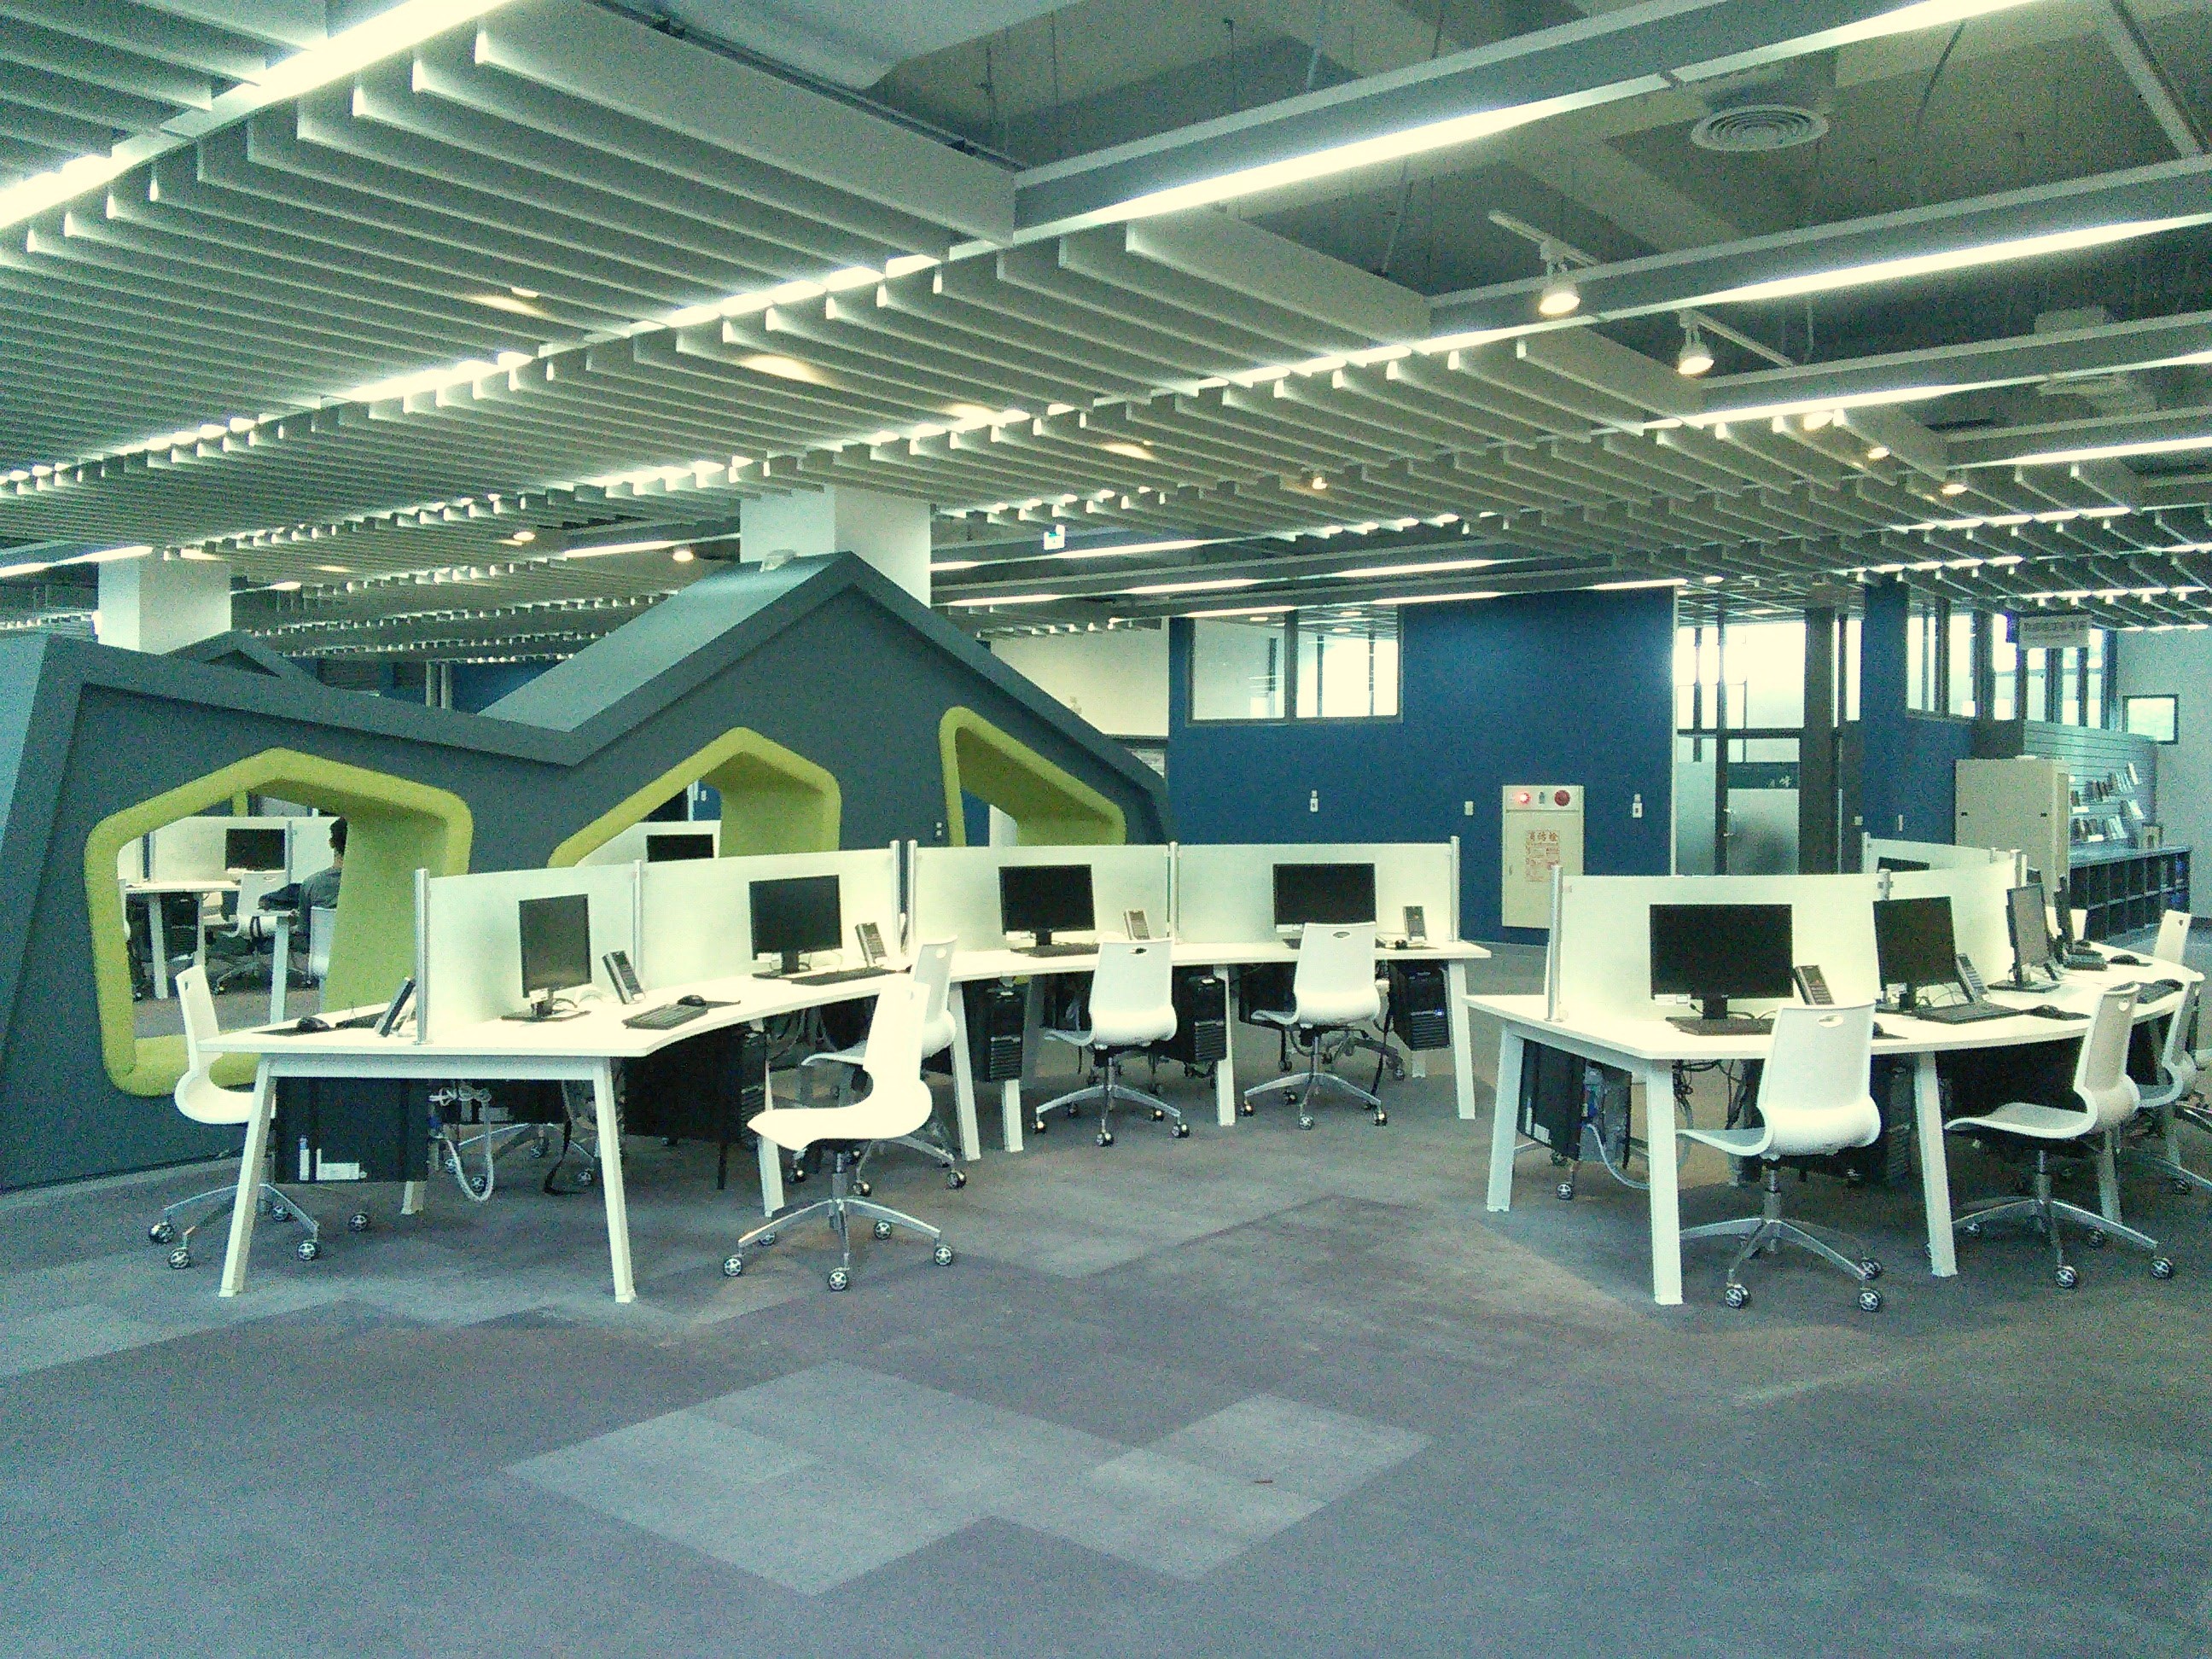 The computer area inside the library